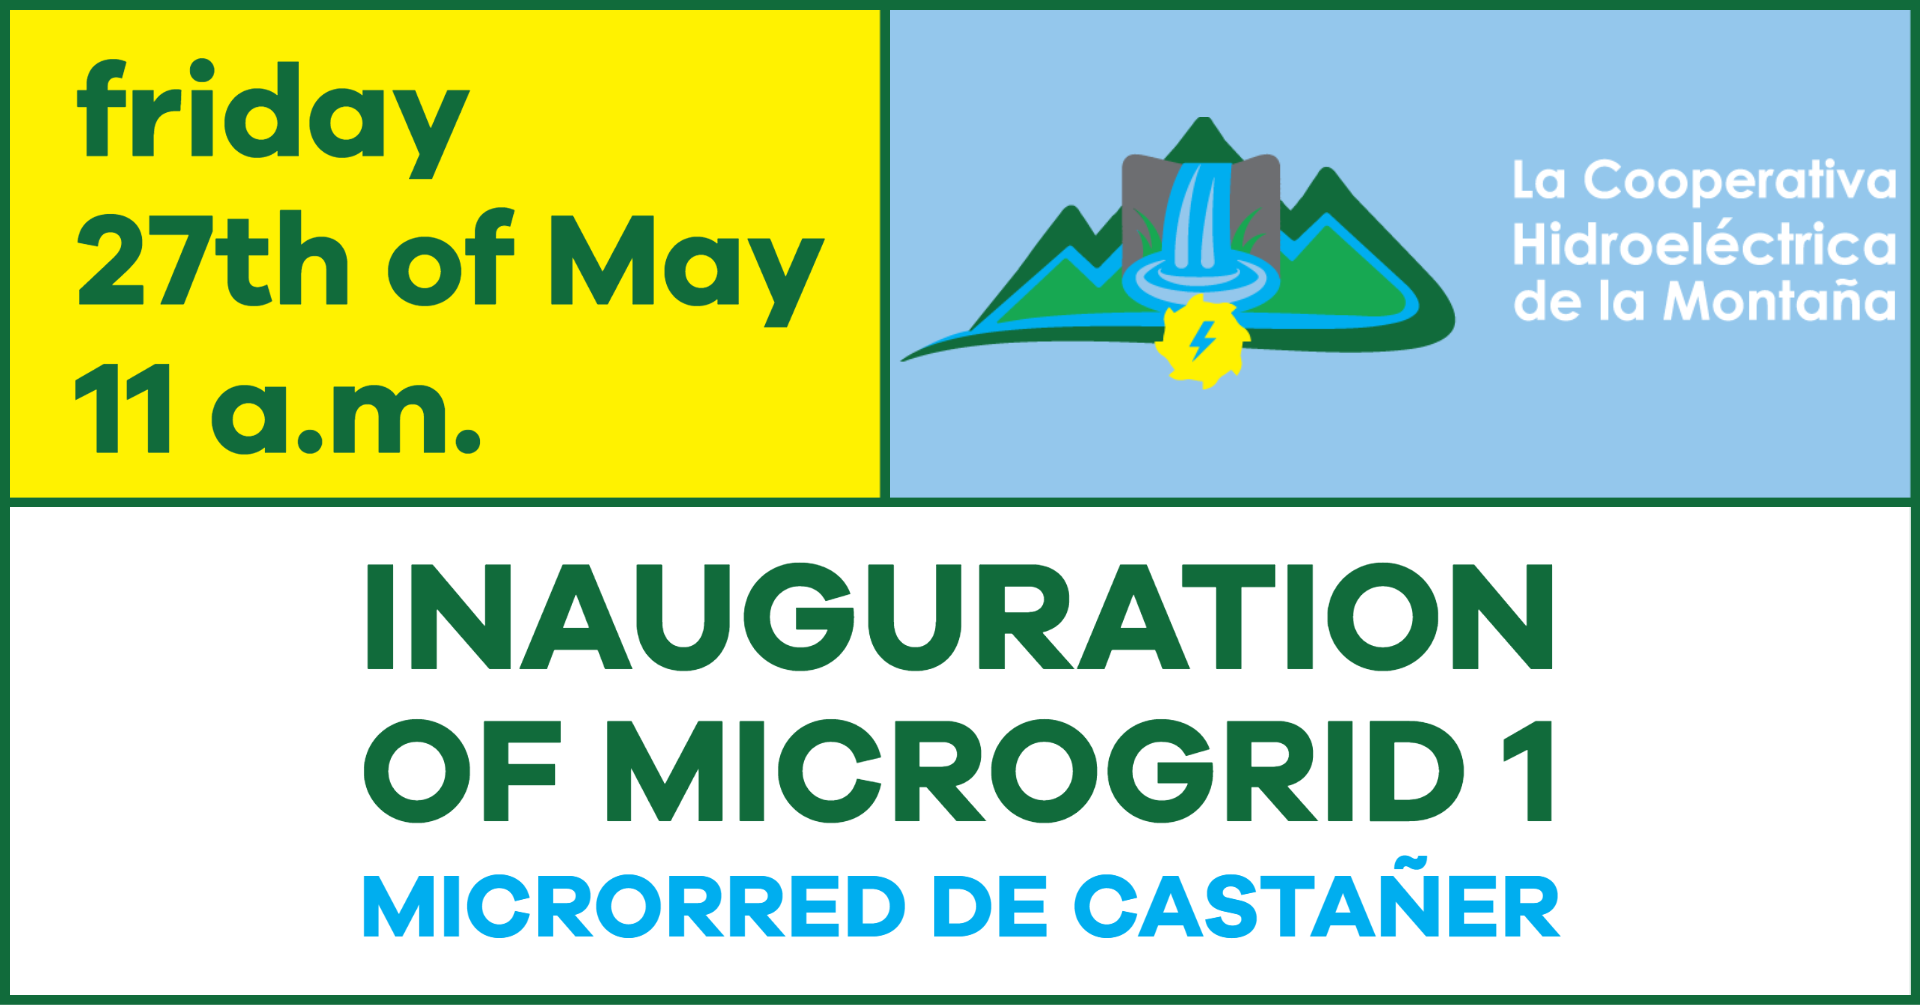 Invitation for the inauguration of Microgrid 1 of the Microrred de Castañer